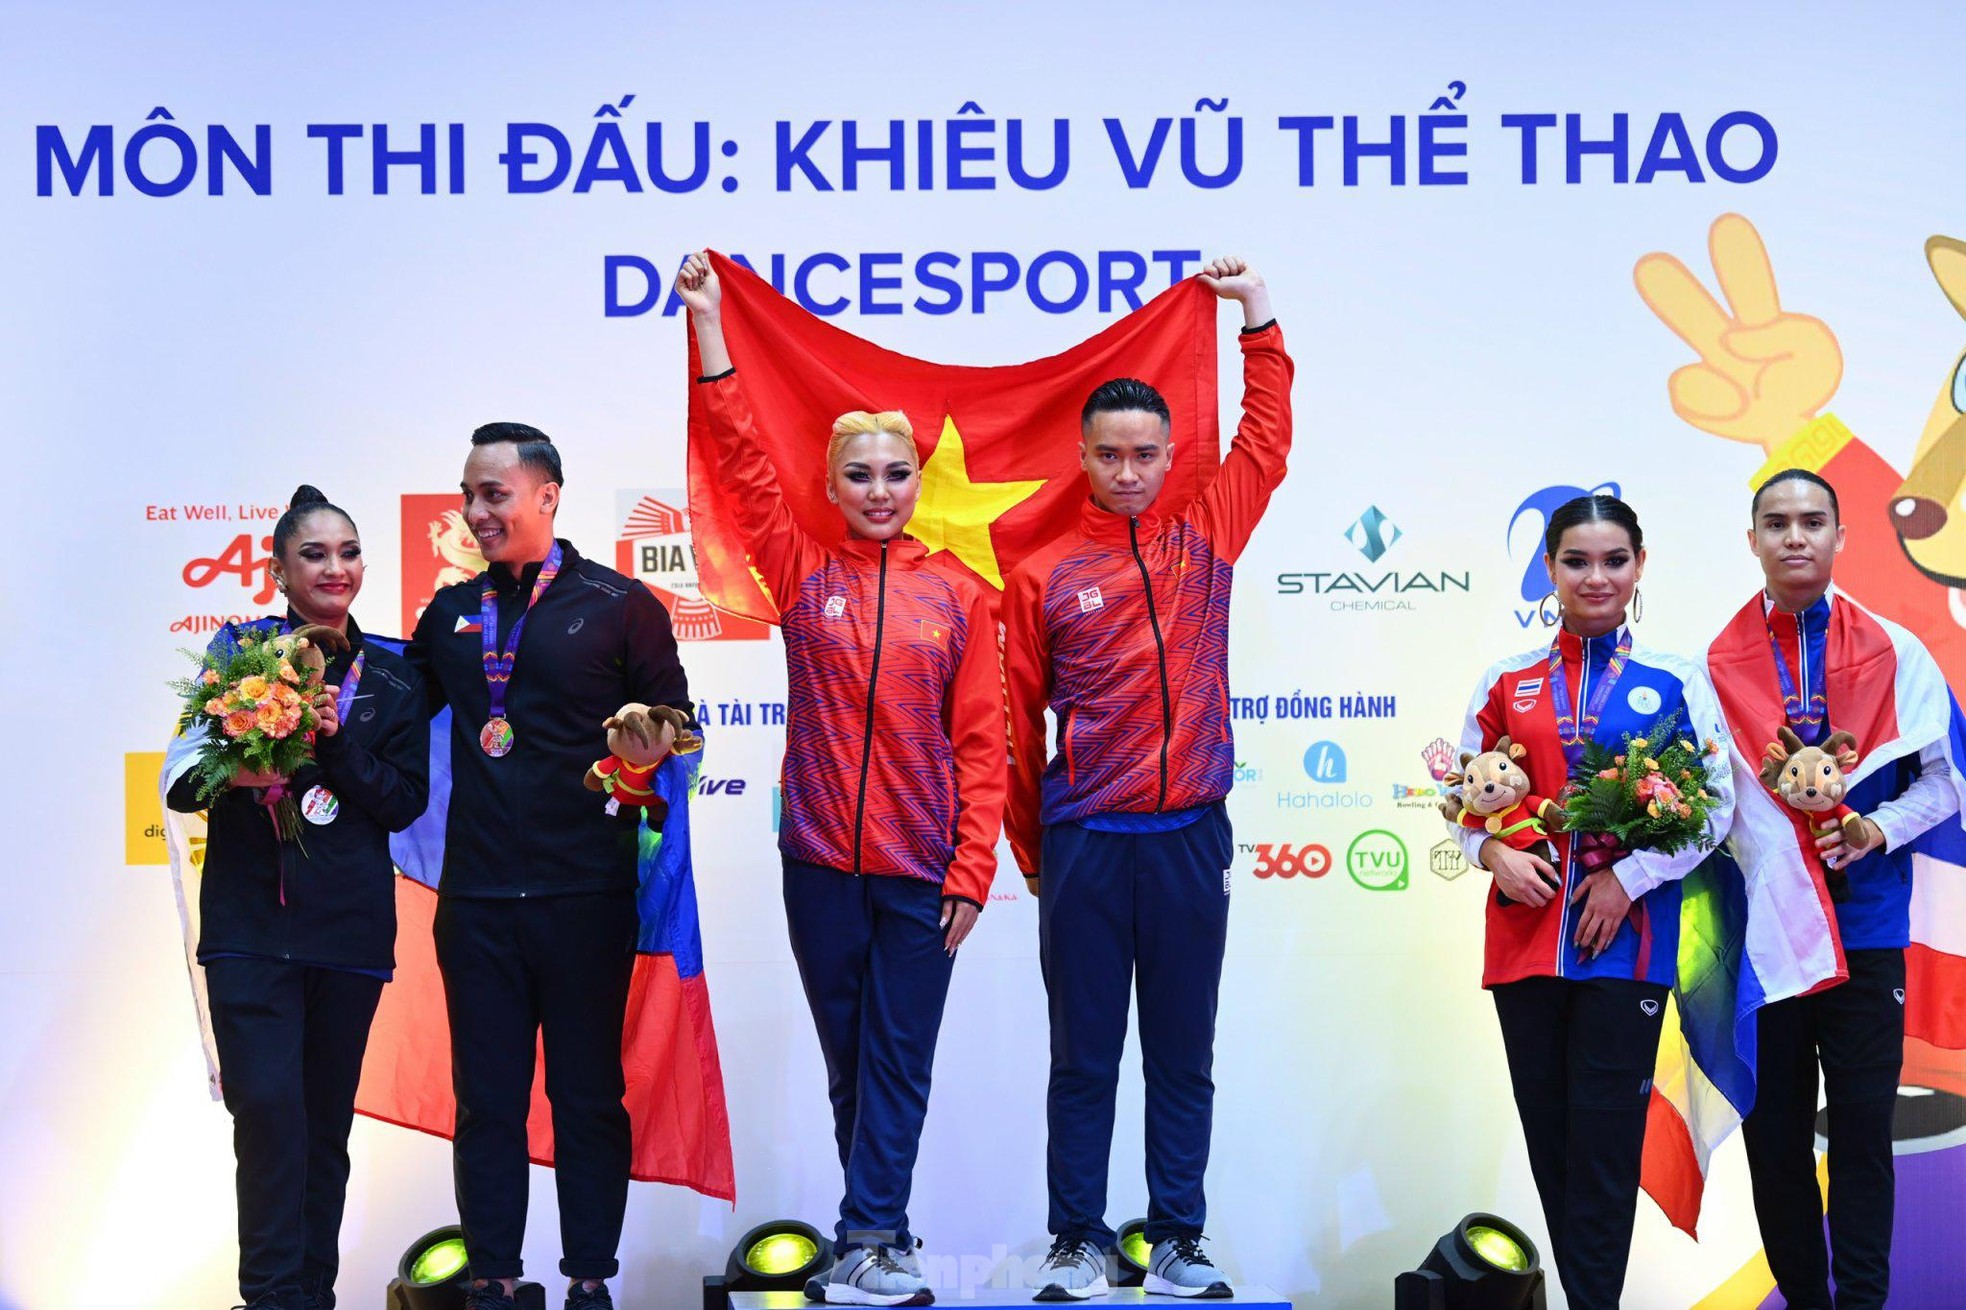 Watch the mesmerizing dance that helped Dancesport Vietnam win 5 gold medals at the 31st SEA Games - Photo 14.